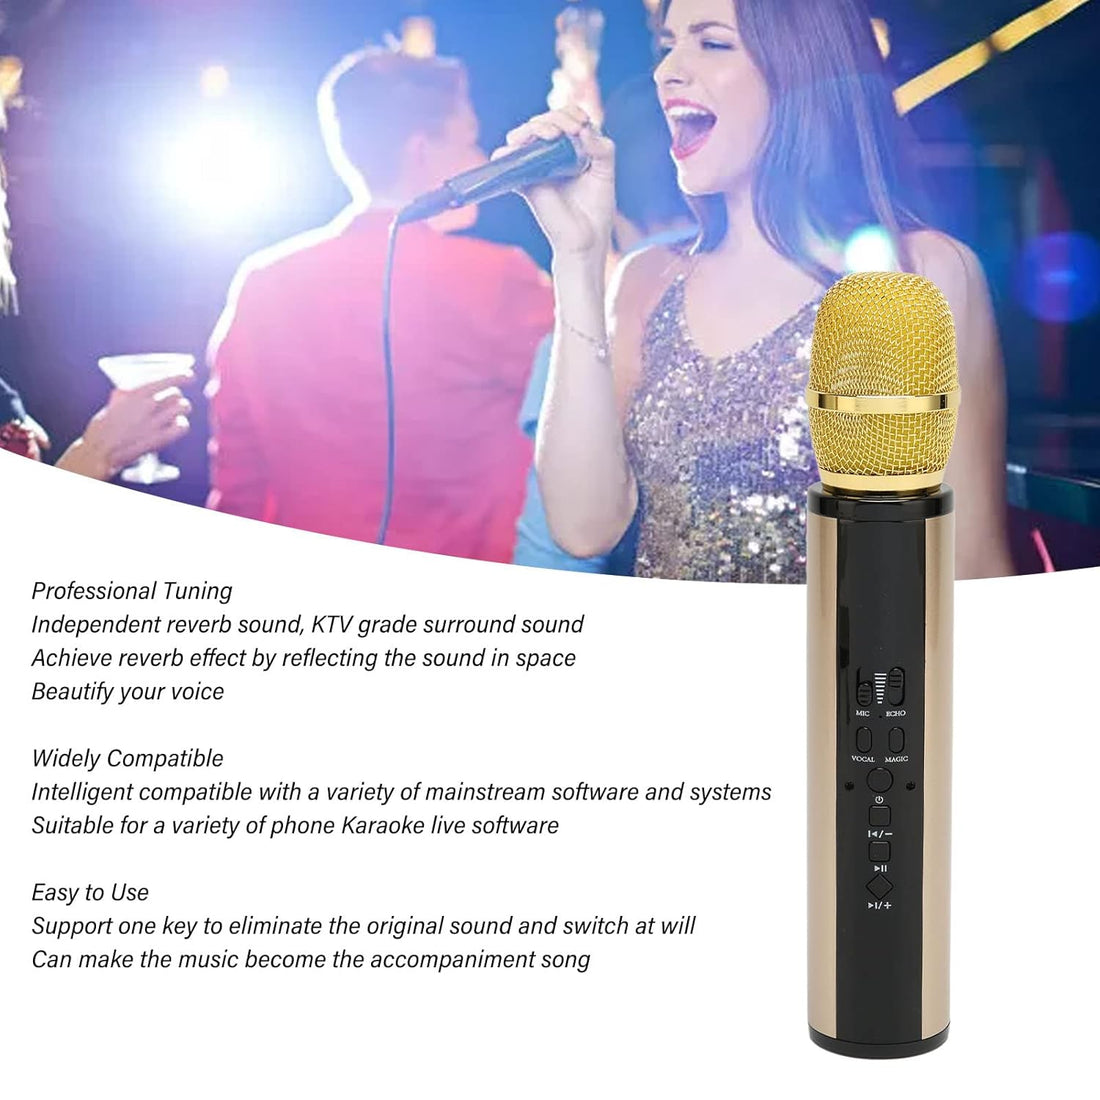 ASHATA K8 Bluetooth Wireless Microphone, Support Tuning, DSP Noise Reduction, Ear Monitoring, UHF Wireless Handheld Microphone for Karaoke Machine, Speaker (Gold)